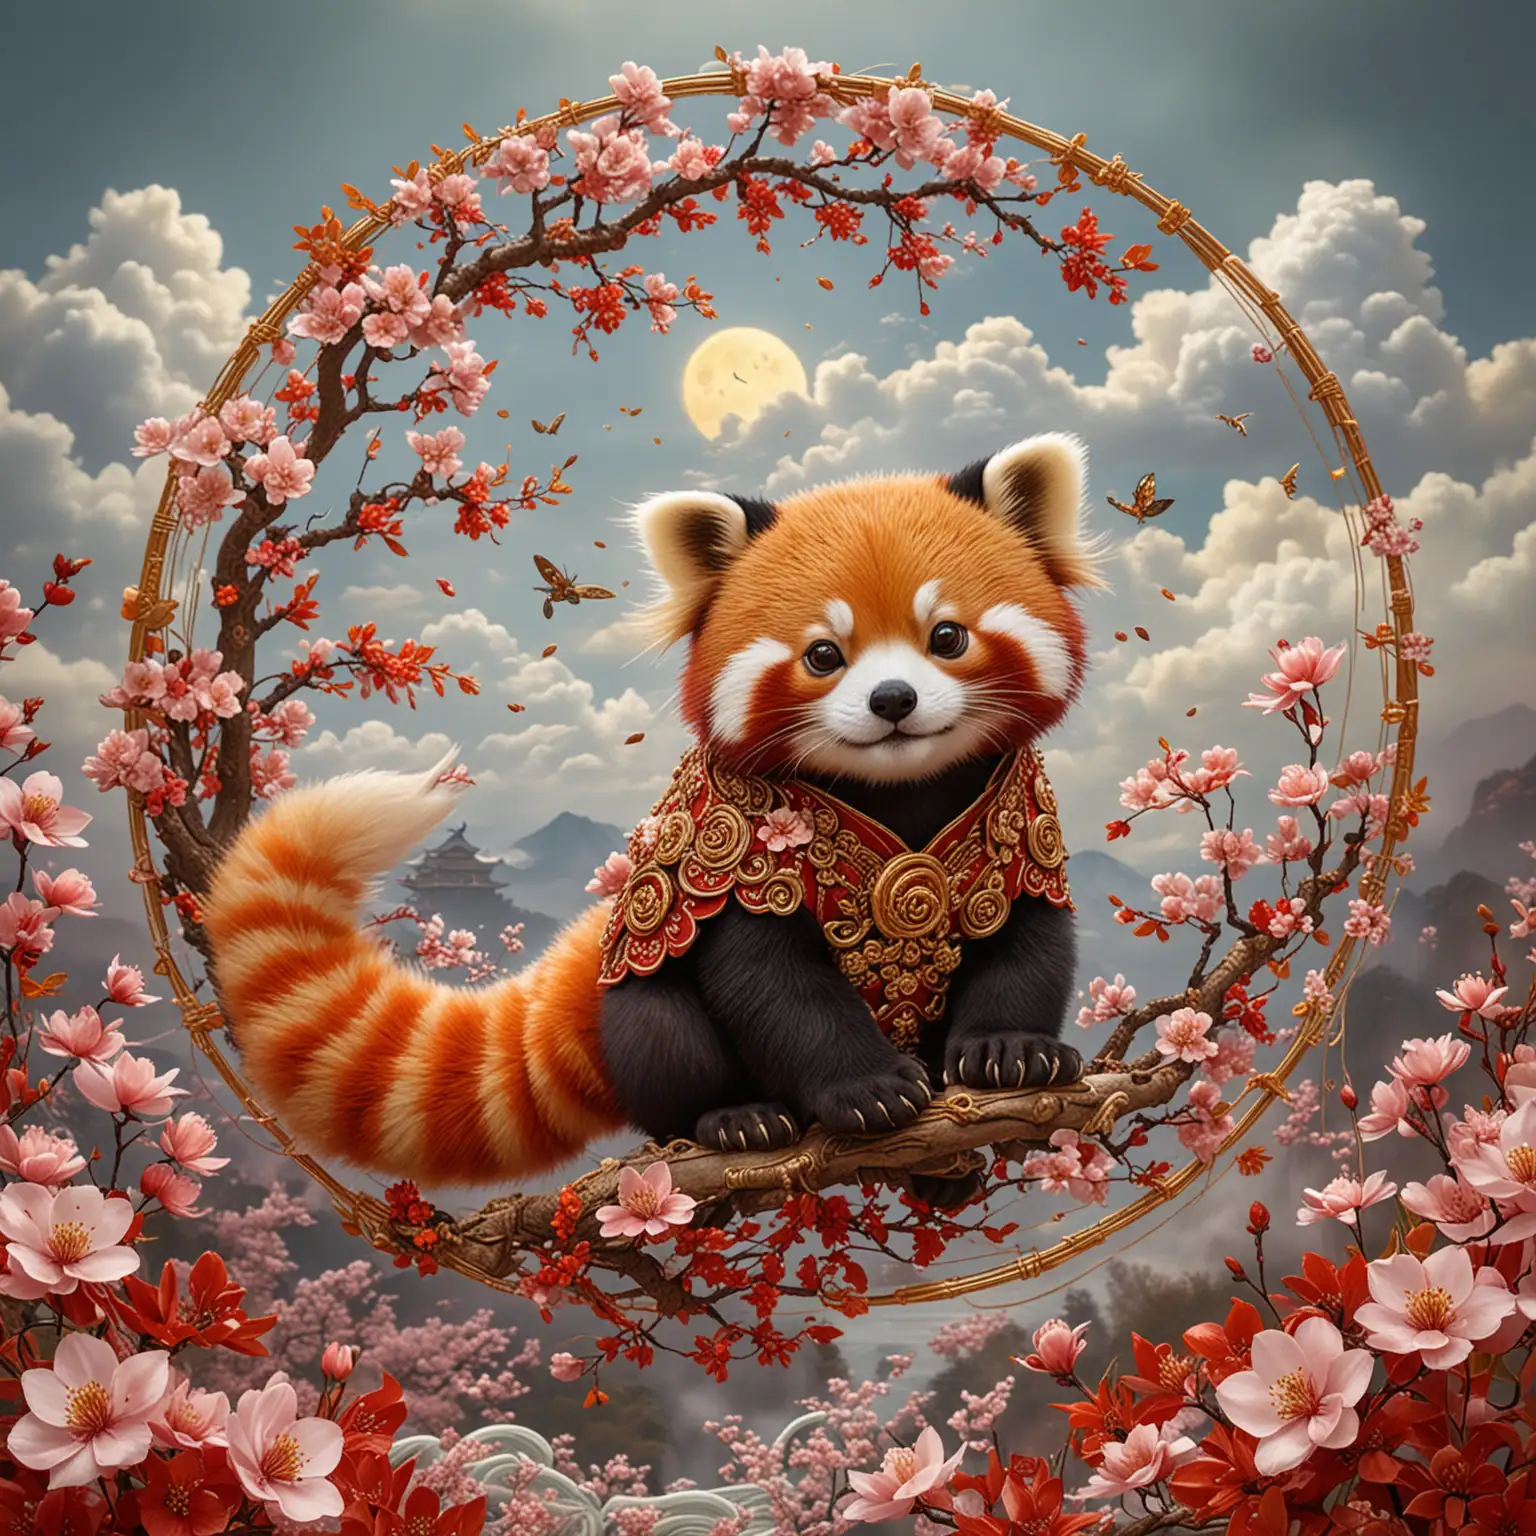 Mystical Red Panda with Nine Tails adorned in Ornate Golden Lace amidst Cherry Blossoms